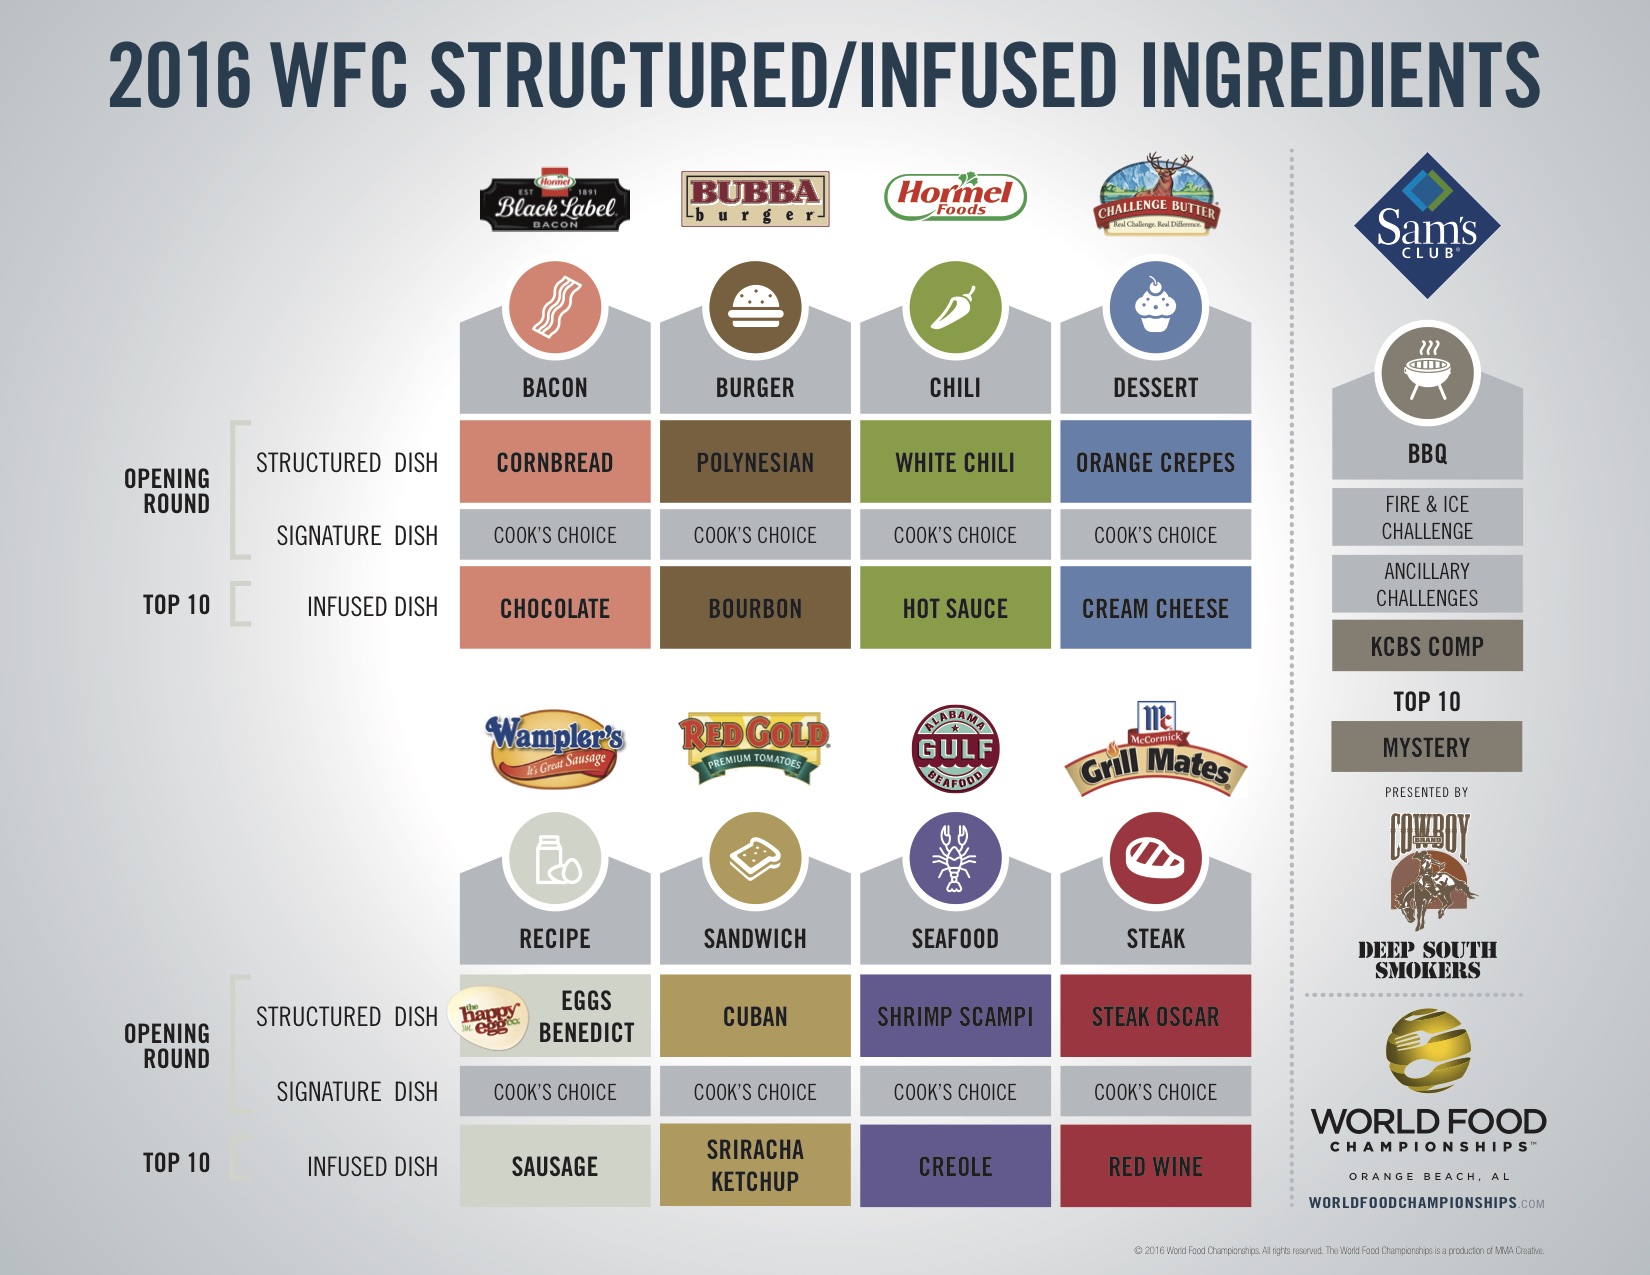 Strucutred Build/Infused Ingredients 2016 Graphic -- 2016-wfc-structured-infused-chart-vfinal.jpg